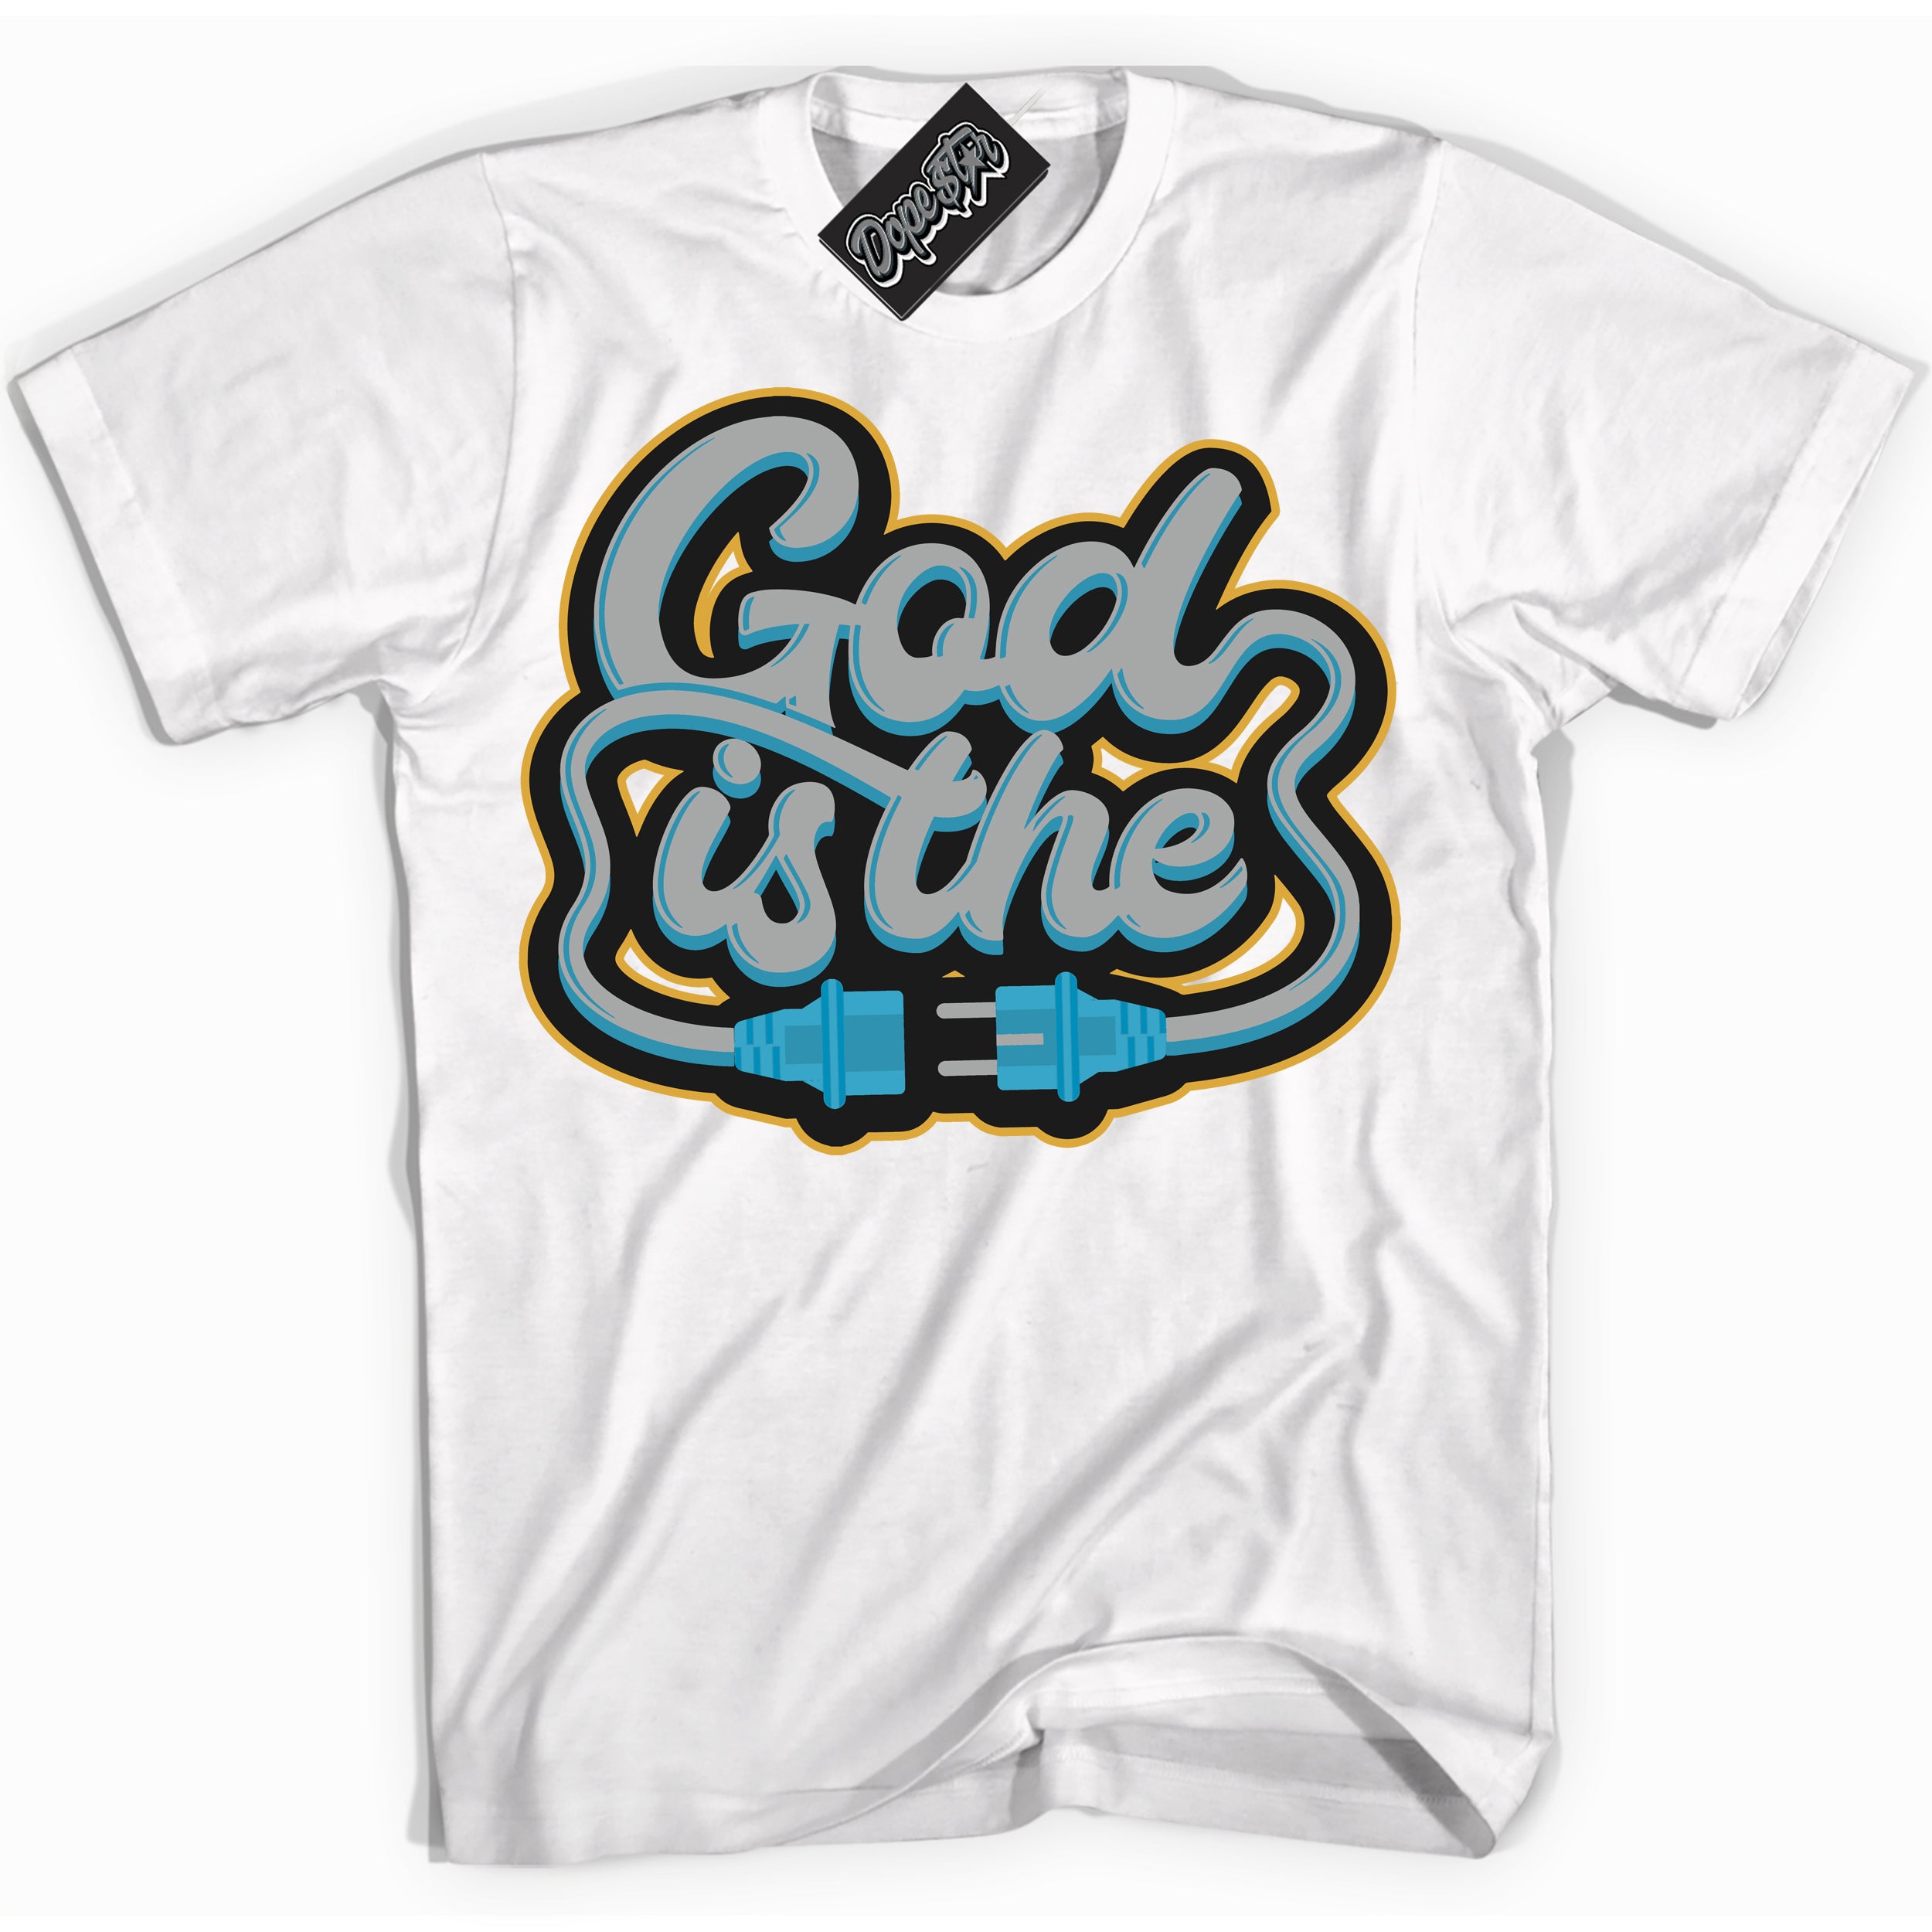 Cool White Shirt with “ God Is The” design that perfectly matches Aqua 5s Sneakers.